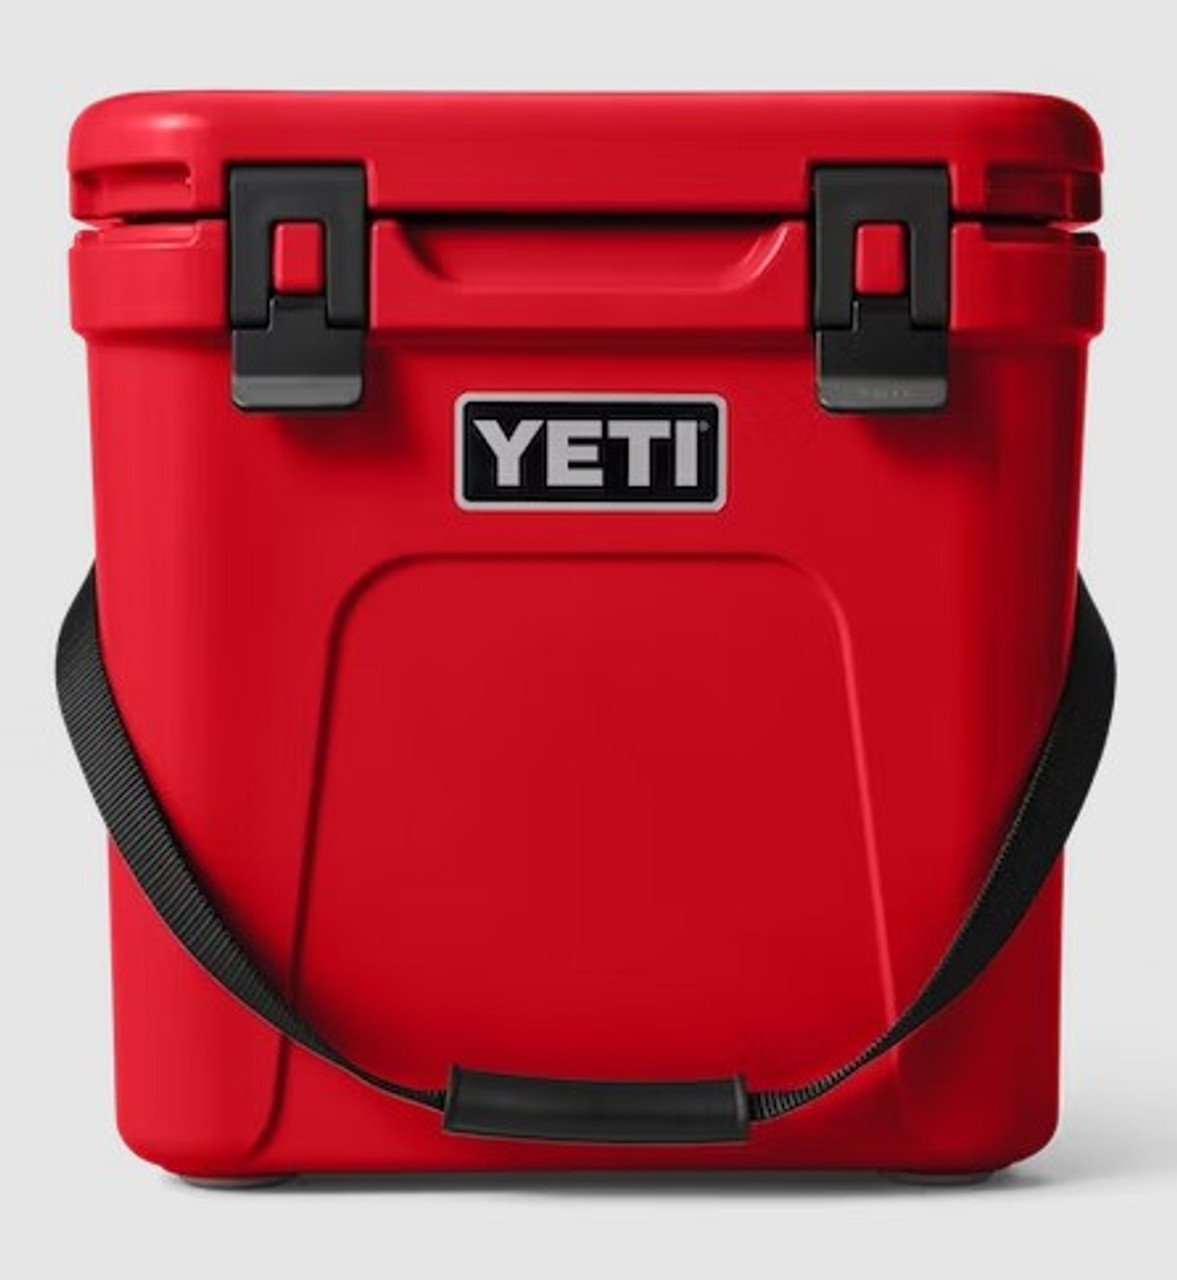 Roadie 24 Hard Cooler - Rescue Red - Ramsey Outdoor